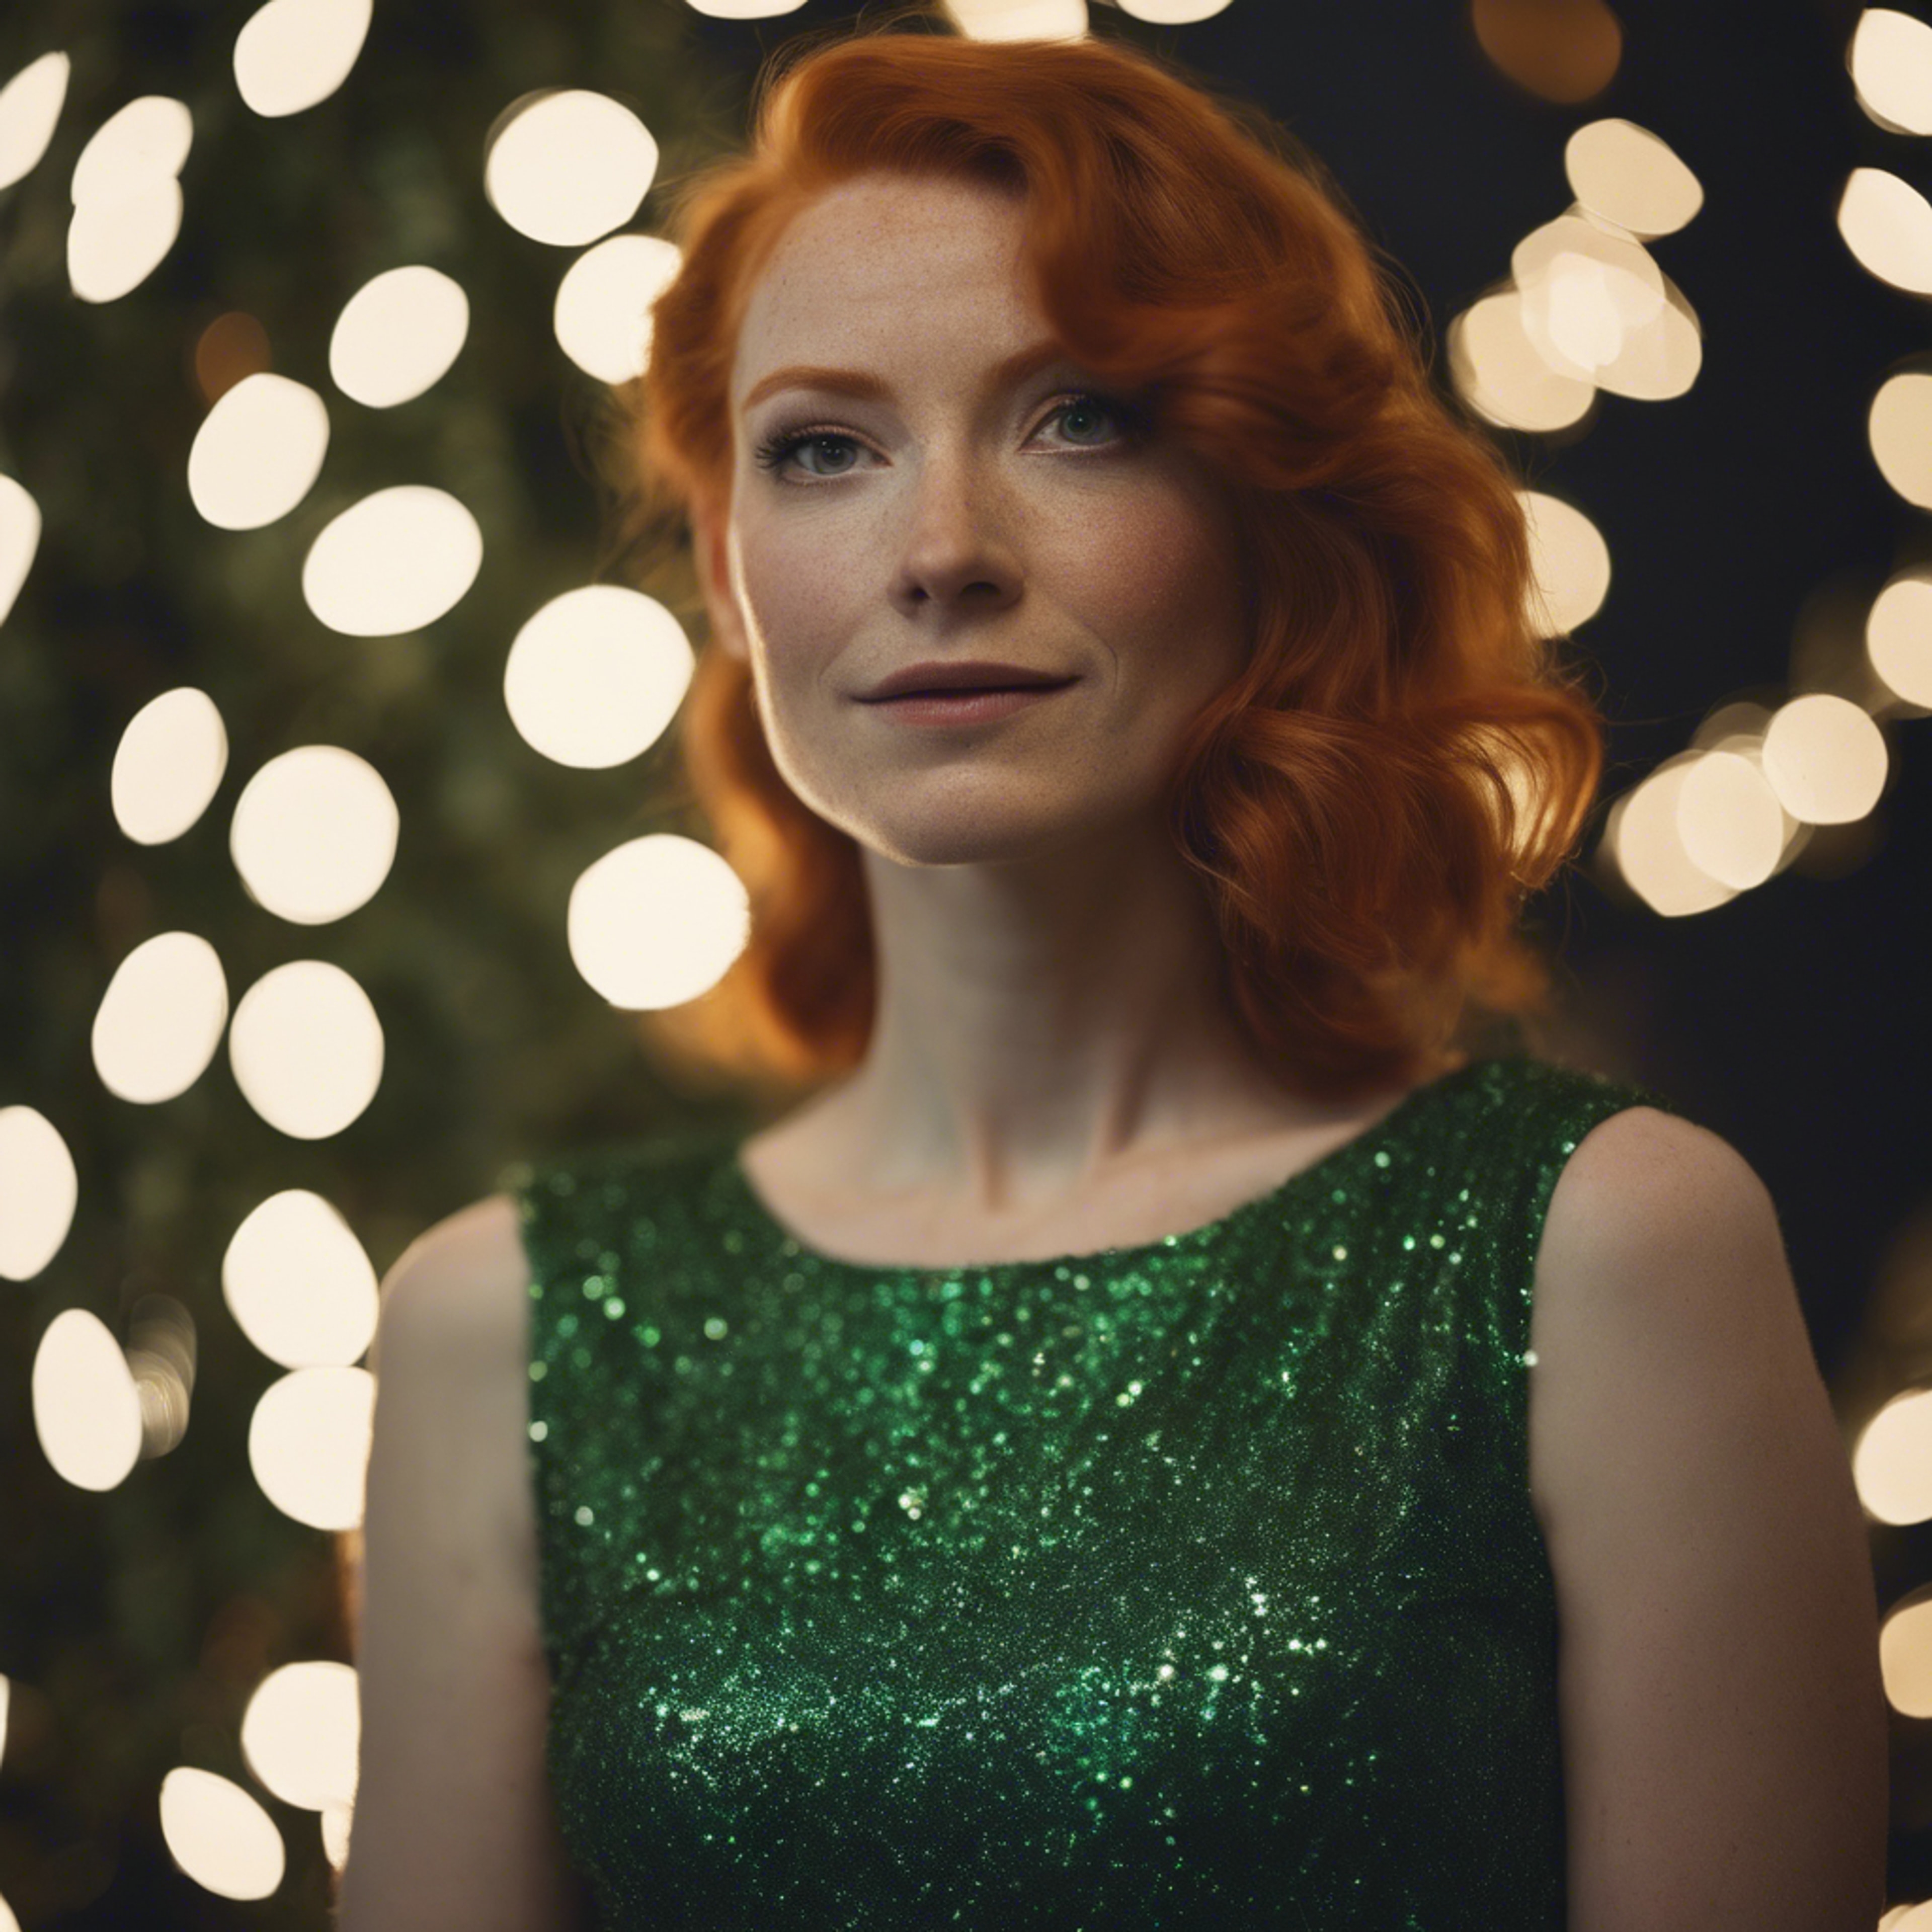 A redheaded woman wearing a sparkly green dress at a Christmas party Обои[a7aea6b7222f4d2facc9]